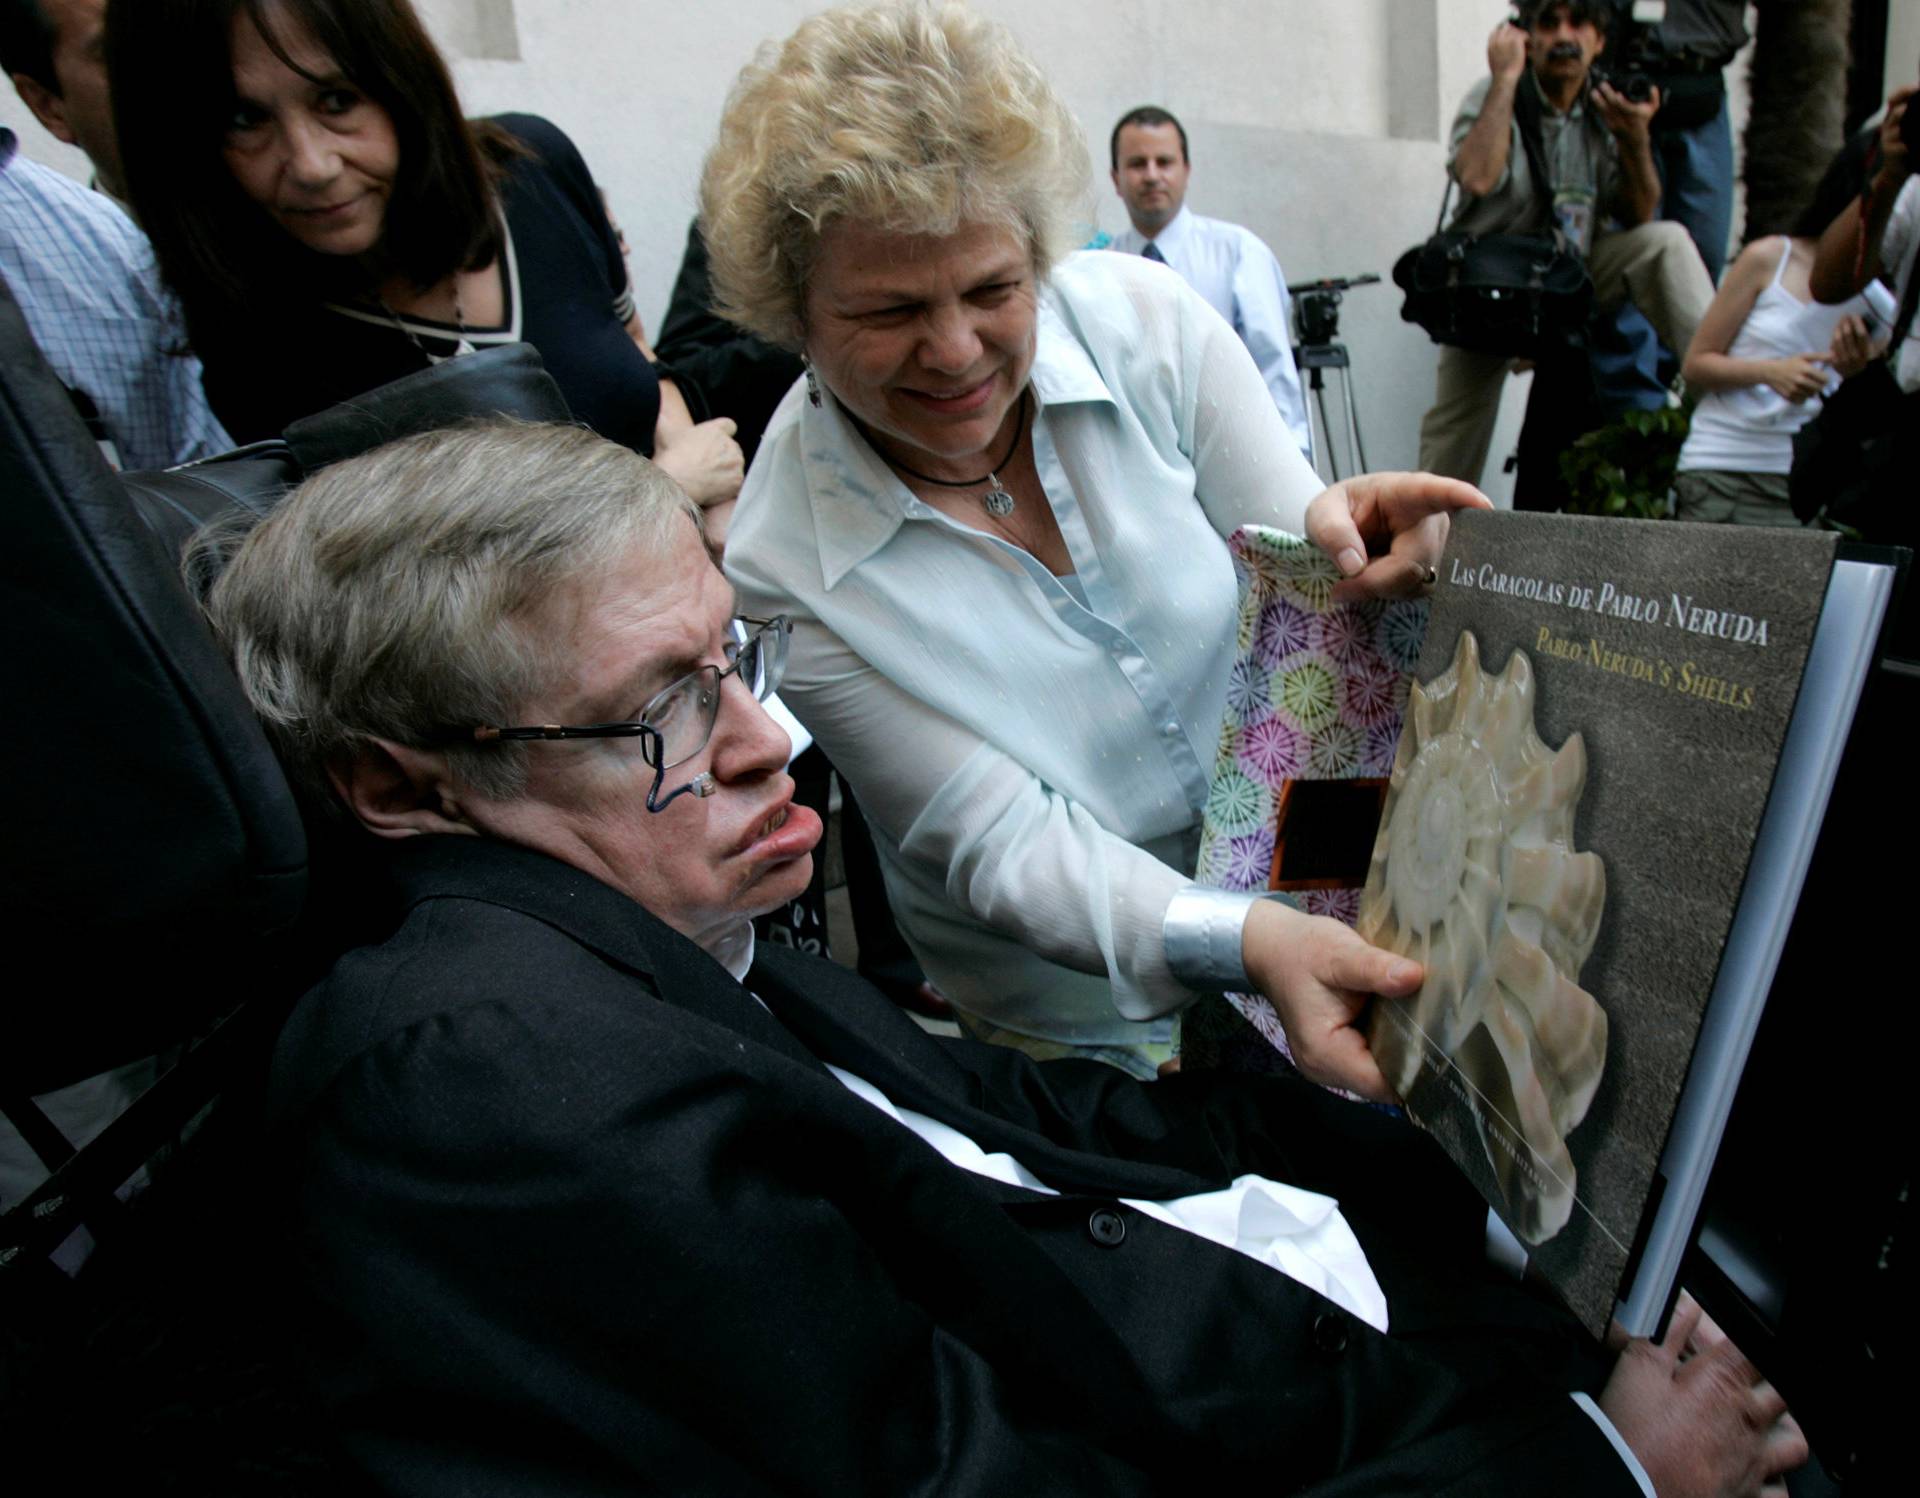 FILE PHOTO: British physicist Hawking looks at book of Chile's Nobel Laureate Neruda after meeting Chile's President Bachelet in Santiago